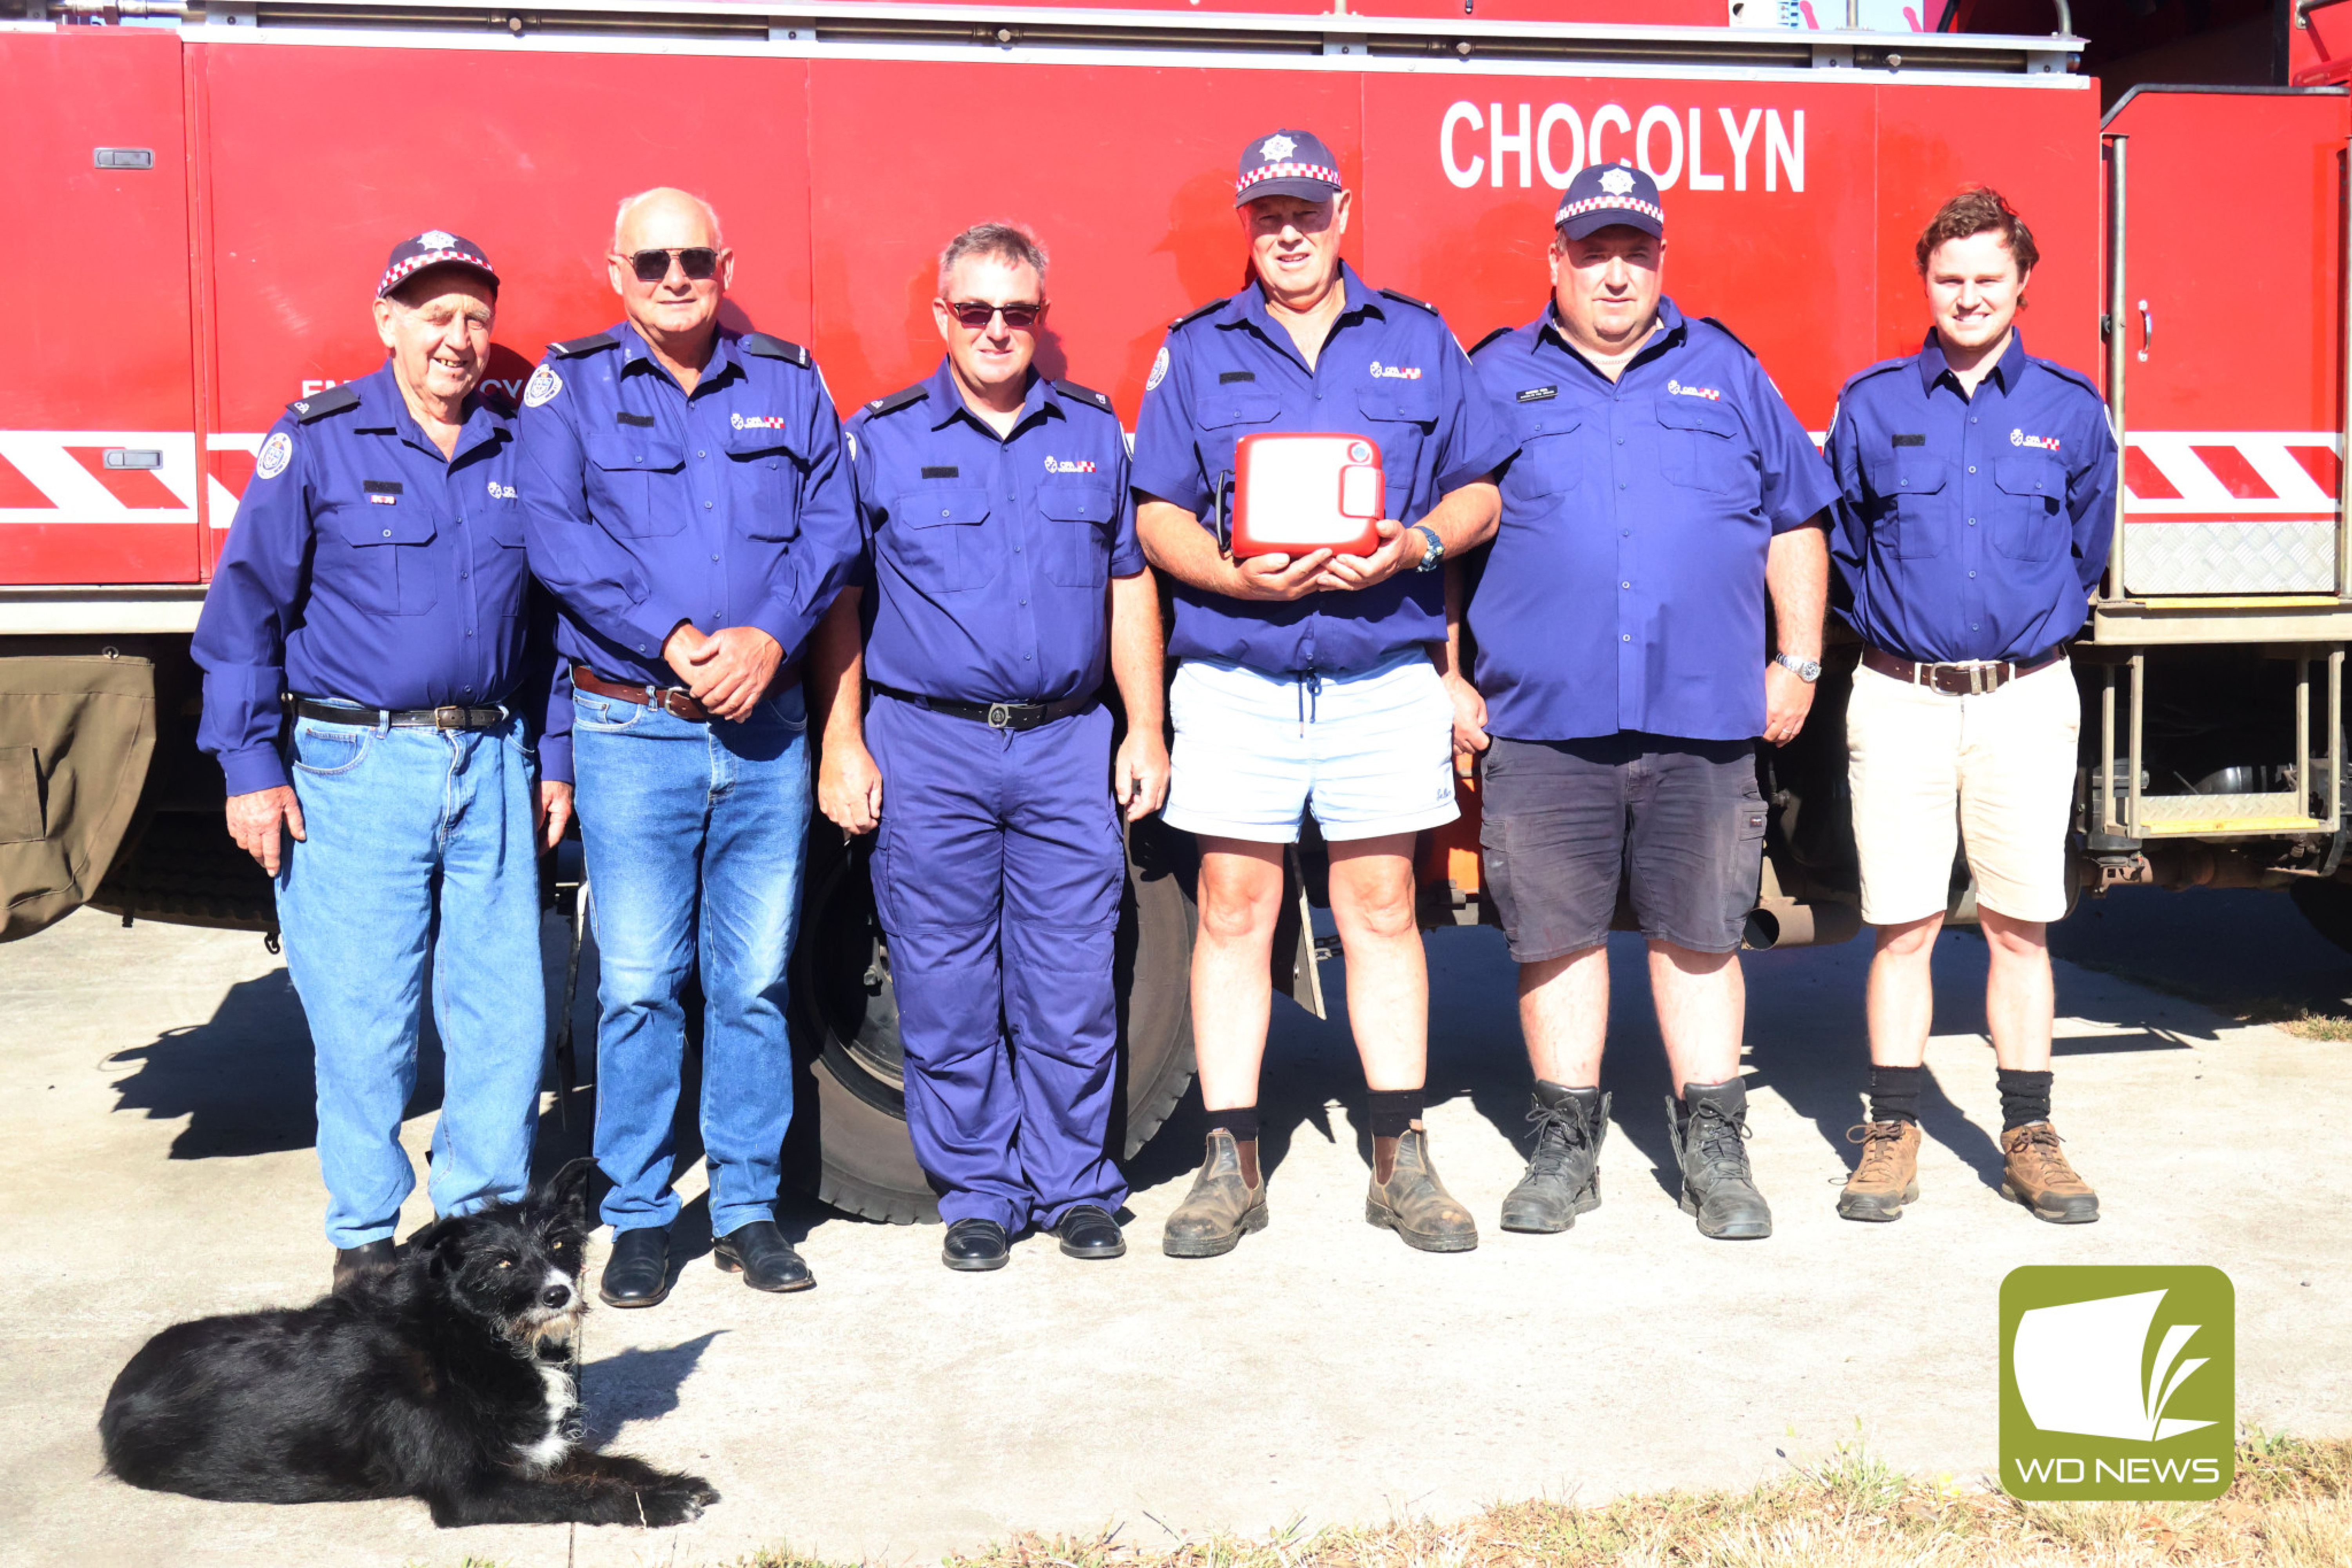 A life-saving addition: Chocolyn’s CFA brigade has installed an AED device to help those in cardiac arrest.